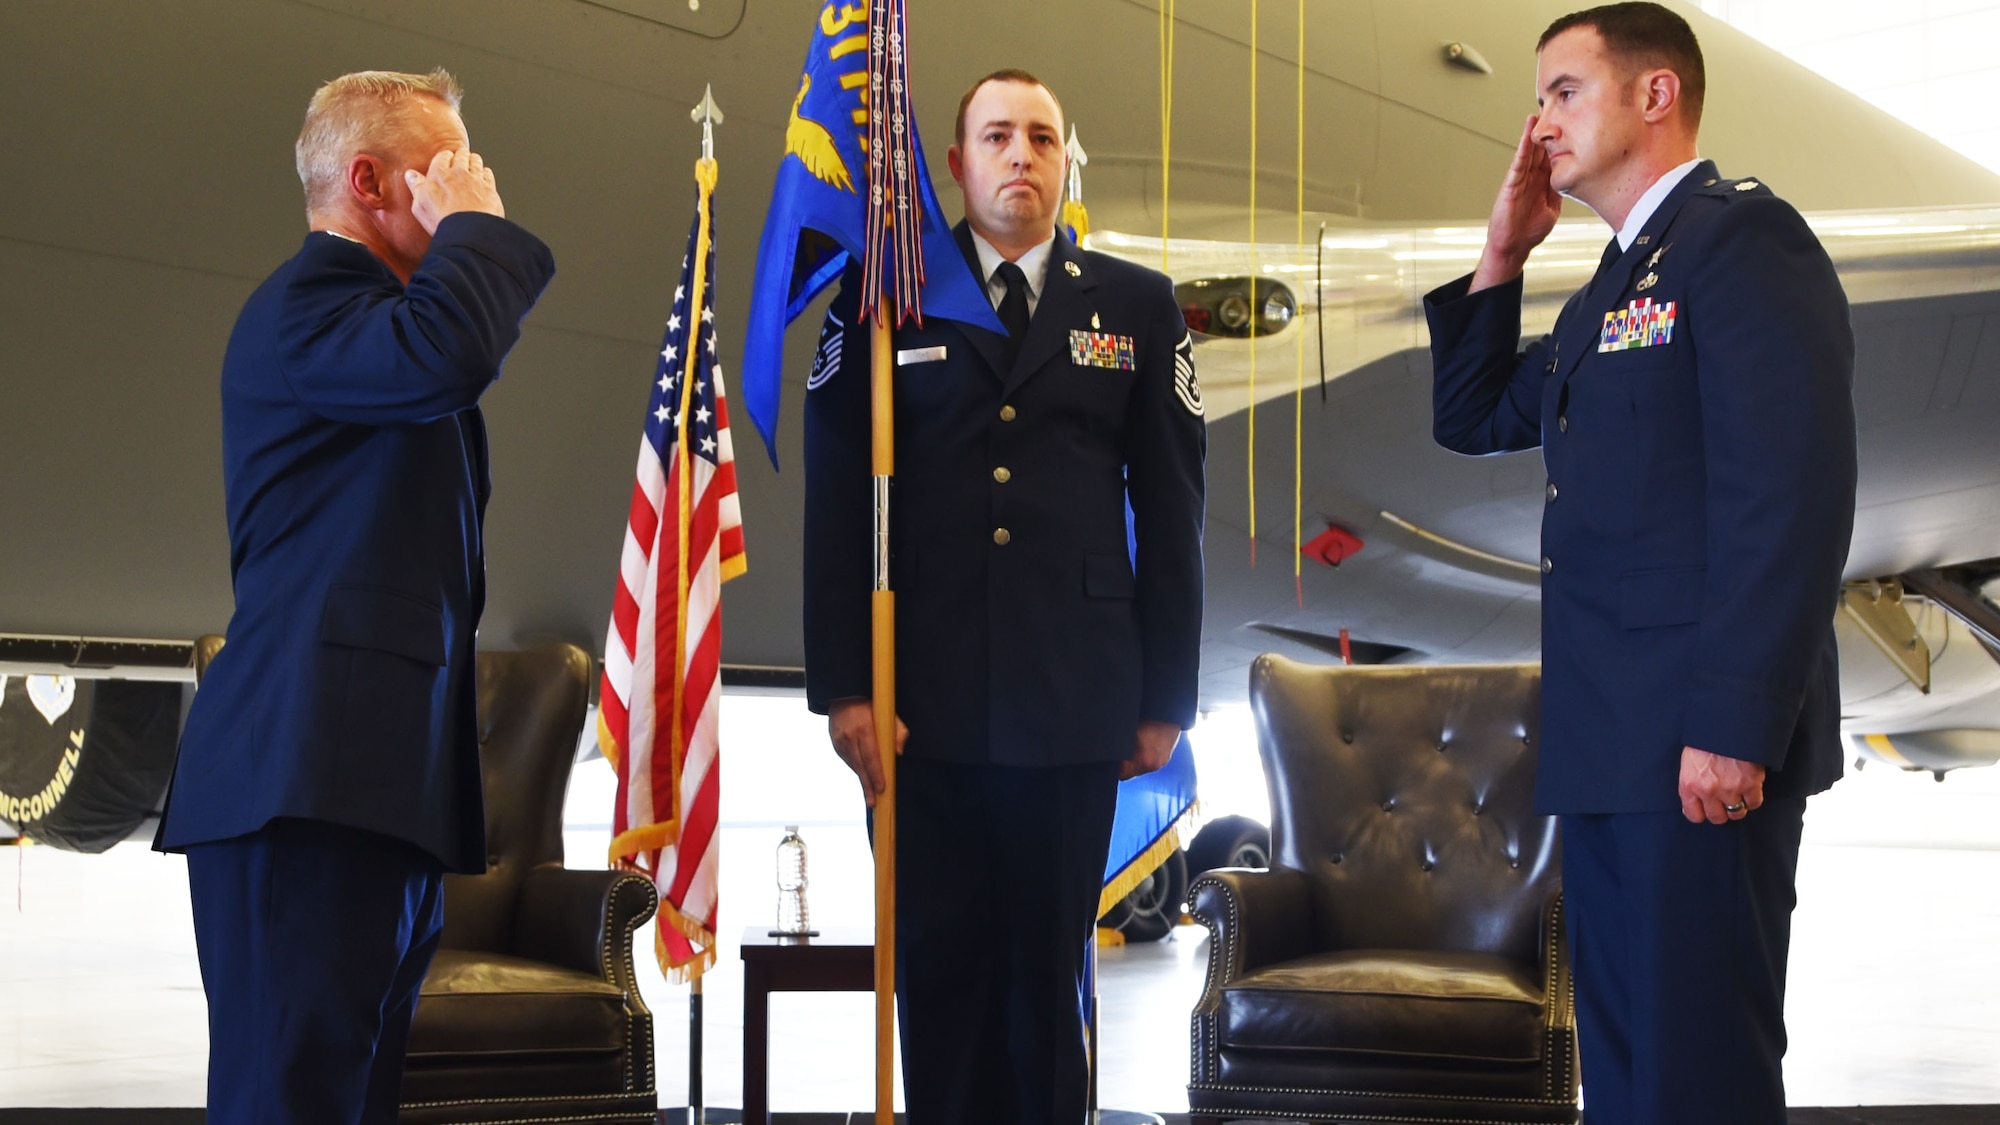 Col. Robert Thompson, 931st Maintenance Group commander (left), receives a salute from Lt. Col. Johnathan Jordan (right), signifying his assumption of command of the 931st Maintenance Squadron.  Jordan was originally scheduled to take command of the 931st MXS a year ago, but took on a nine-month deployment to Iraq